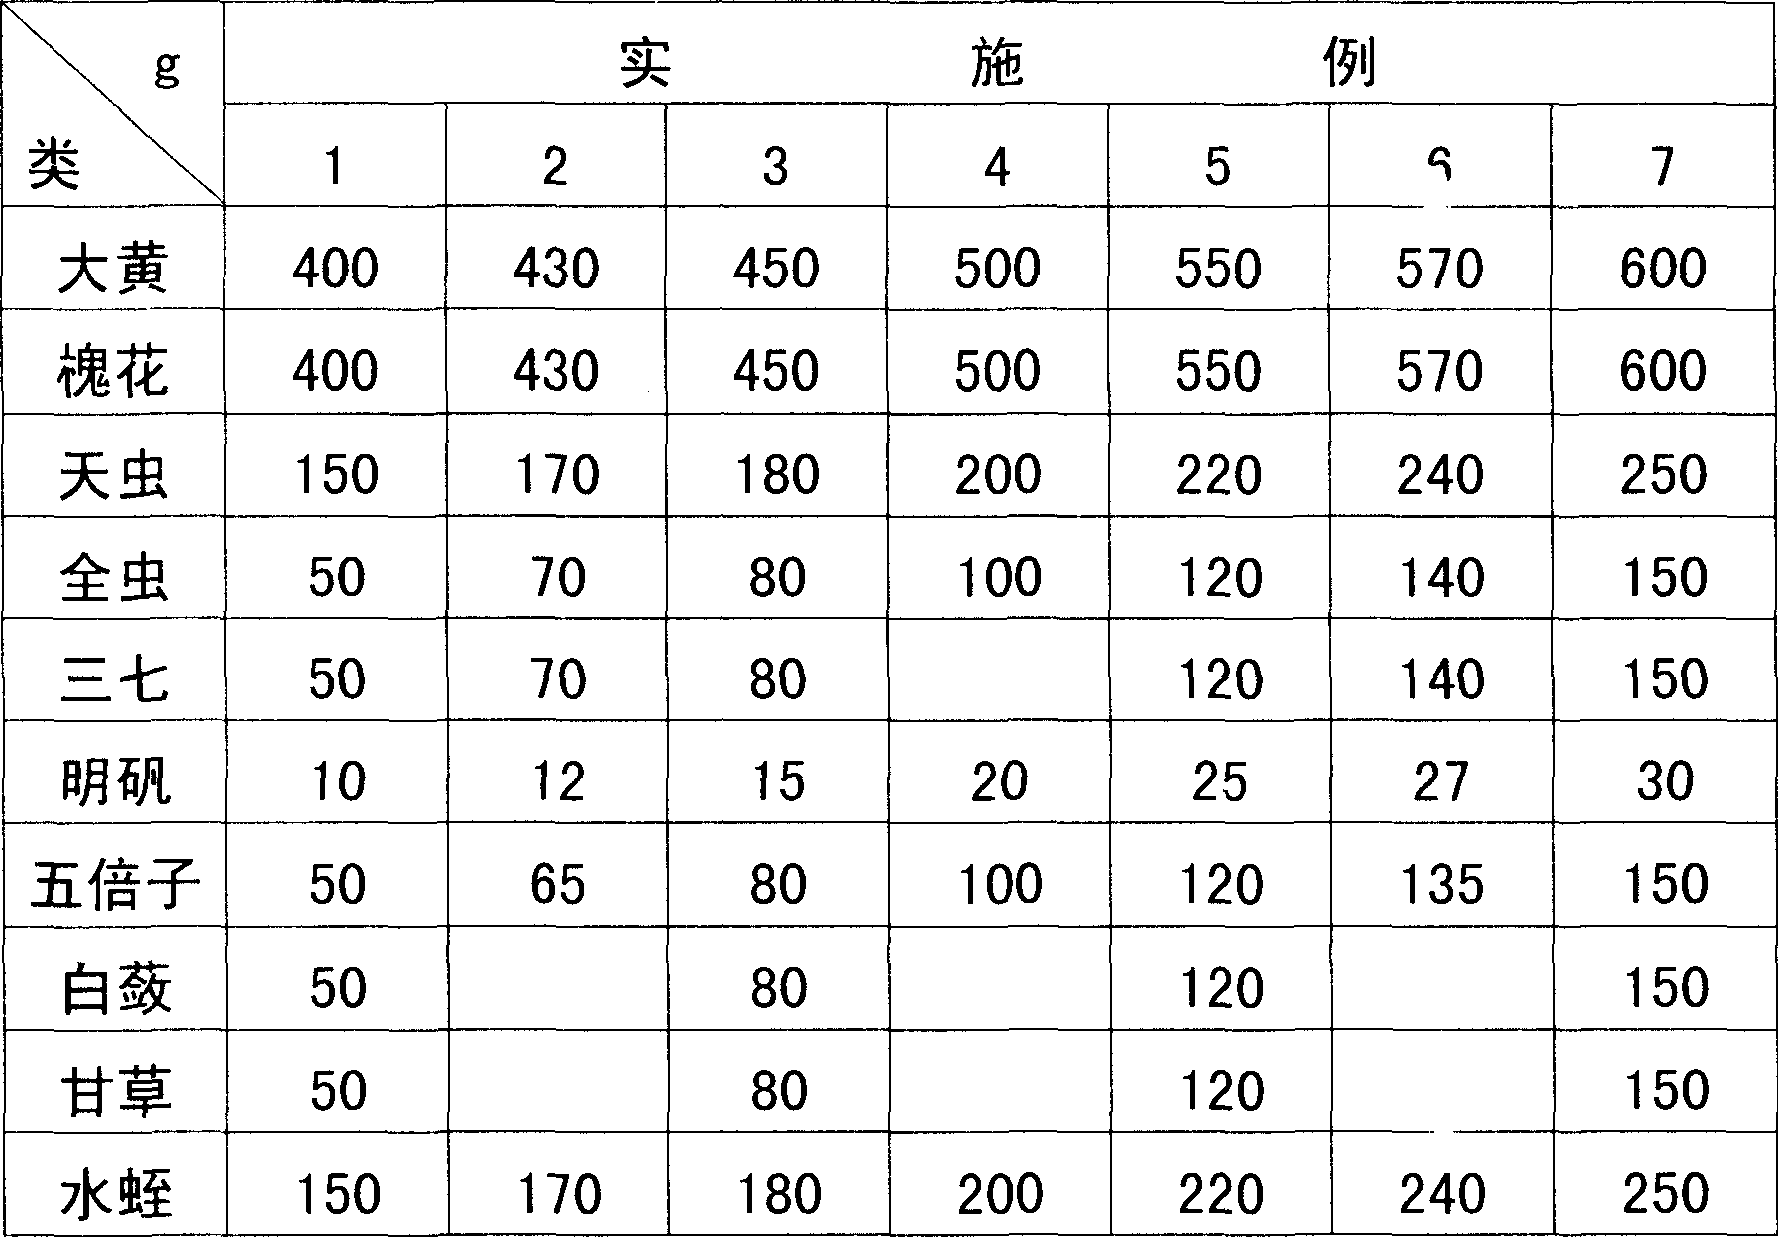 Chinese medicine for treating piles and anal fistula